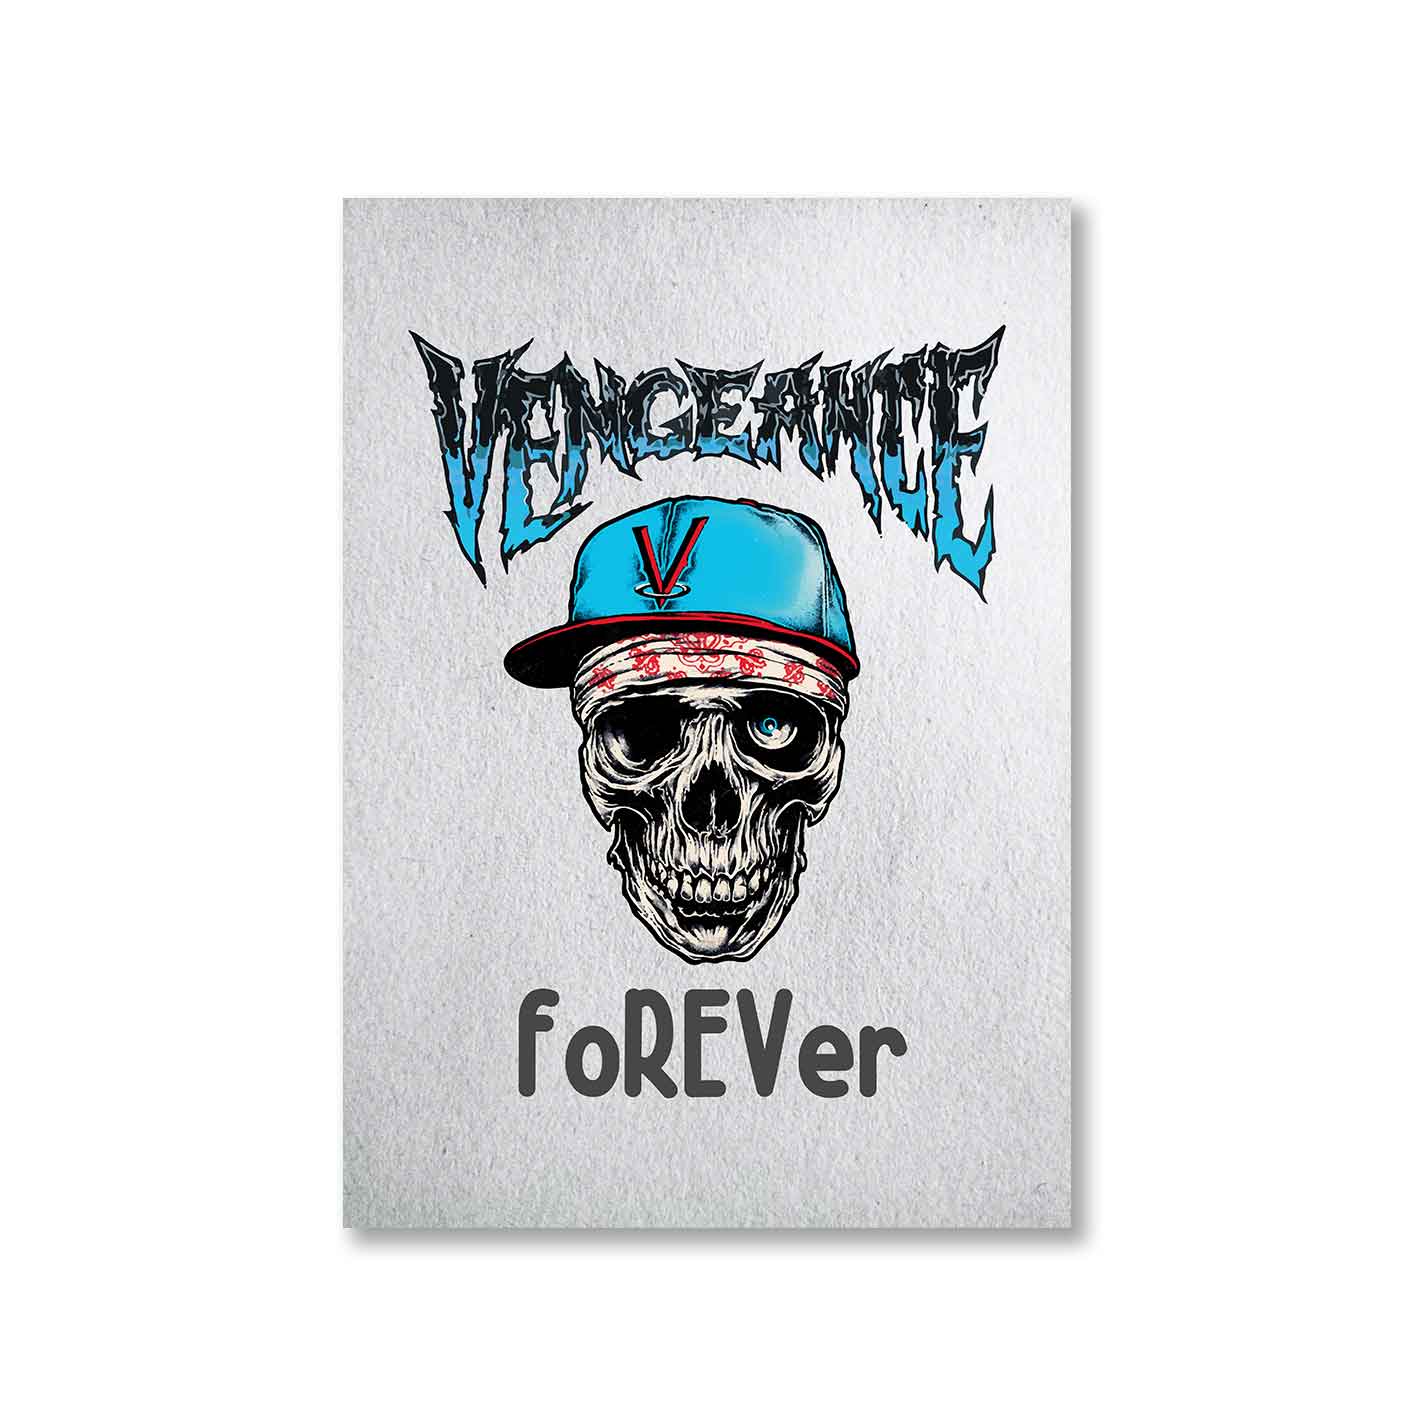 avenged sevenfold vengeance forever poster wall art buy online india the banyan tee tbt a4